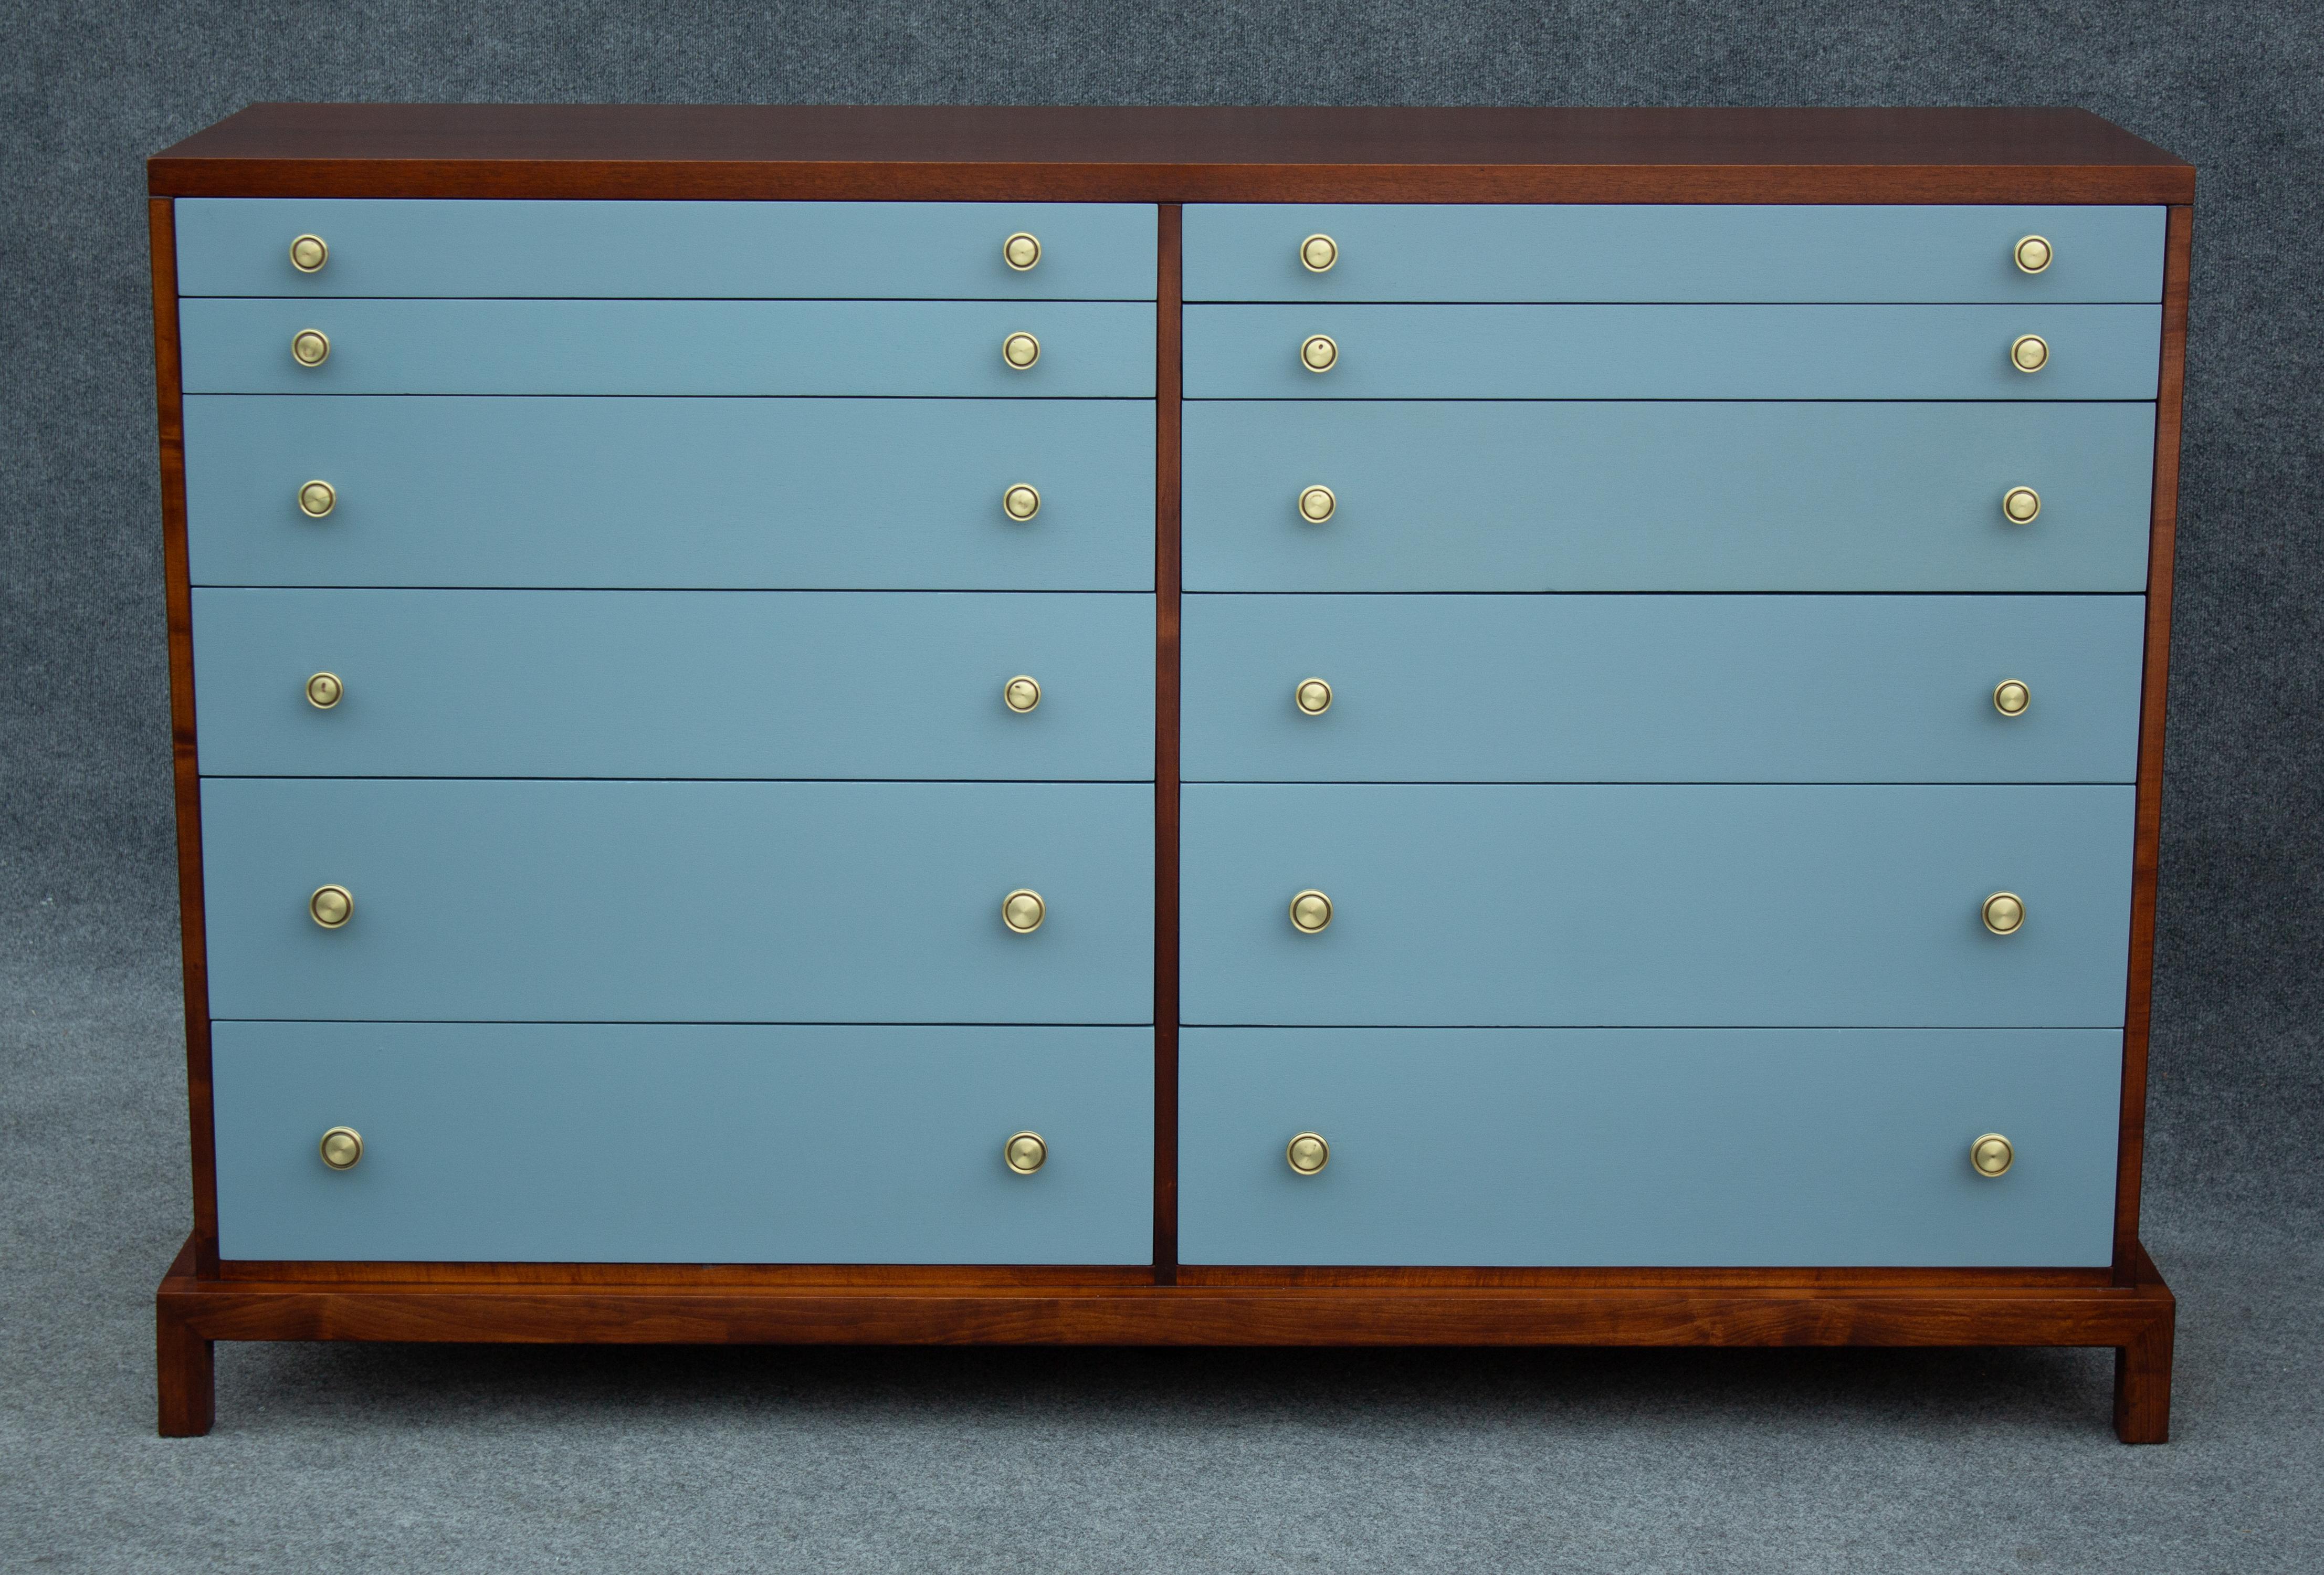 Designed by American design legend T. H. Robsjohn-Gibbings, this dresser was made by Widdicomb for distribution by John Stuart Inc. Typical of pieces by these groups, the construction quality on this dresser is extremely high. The finely grained